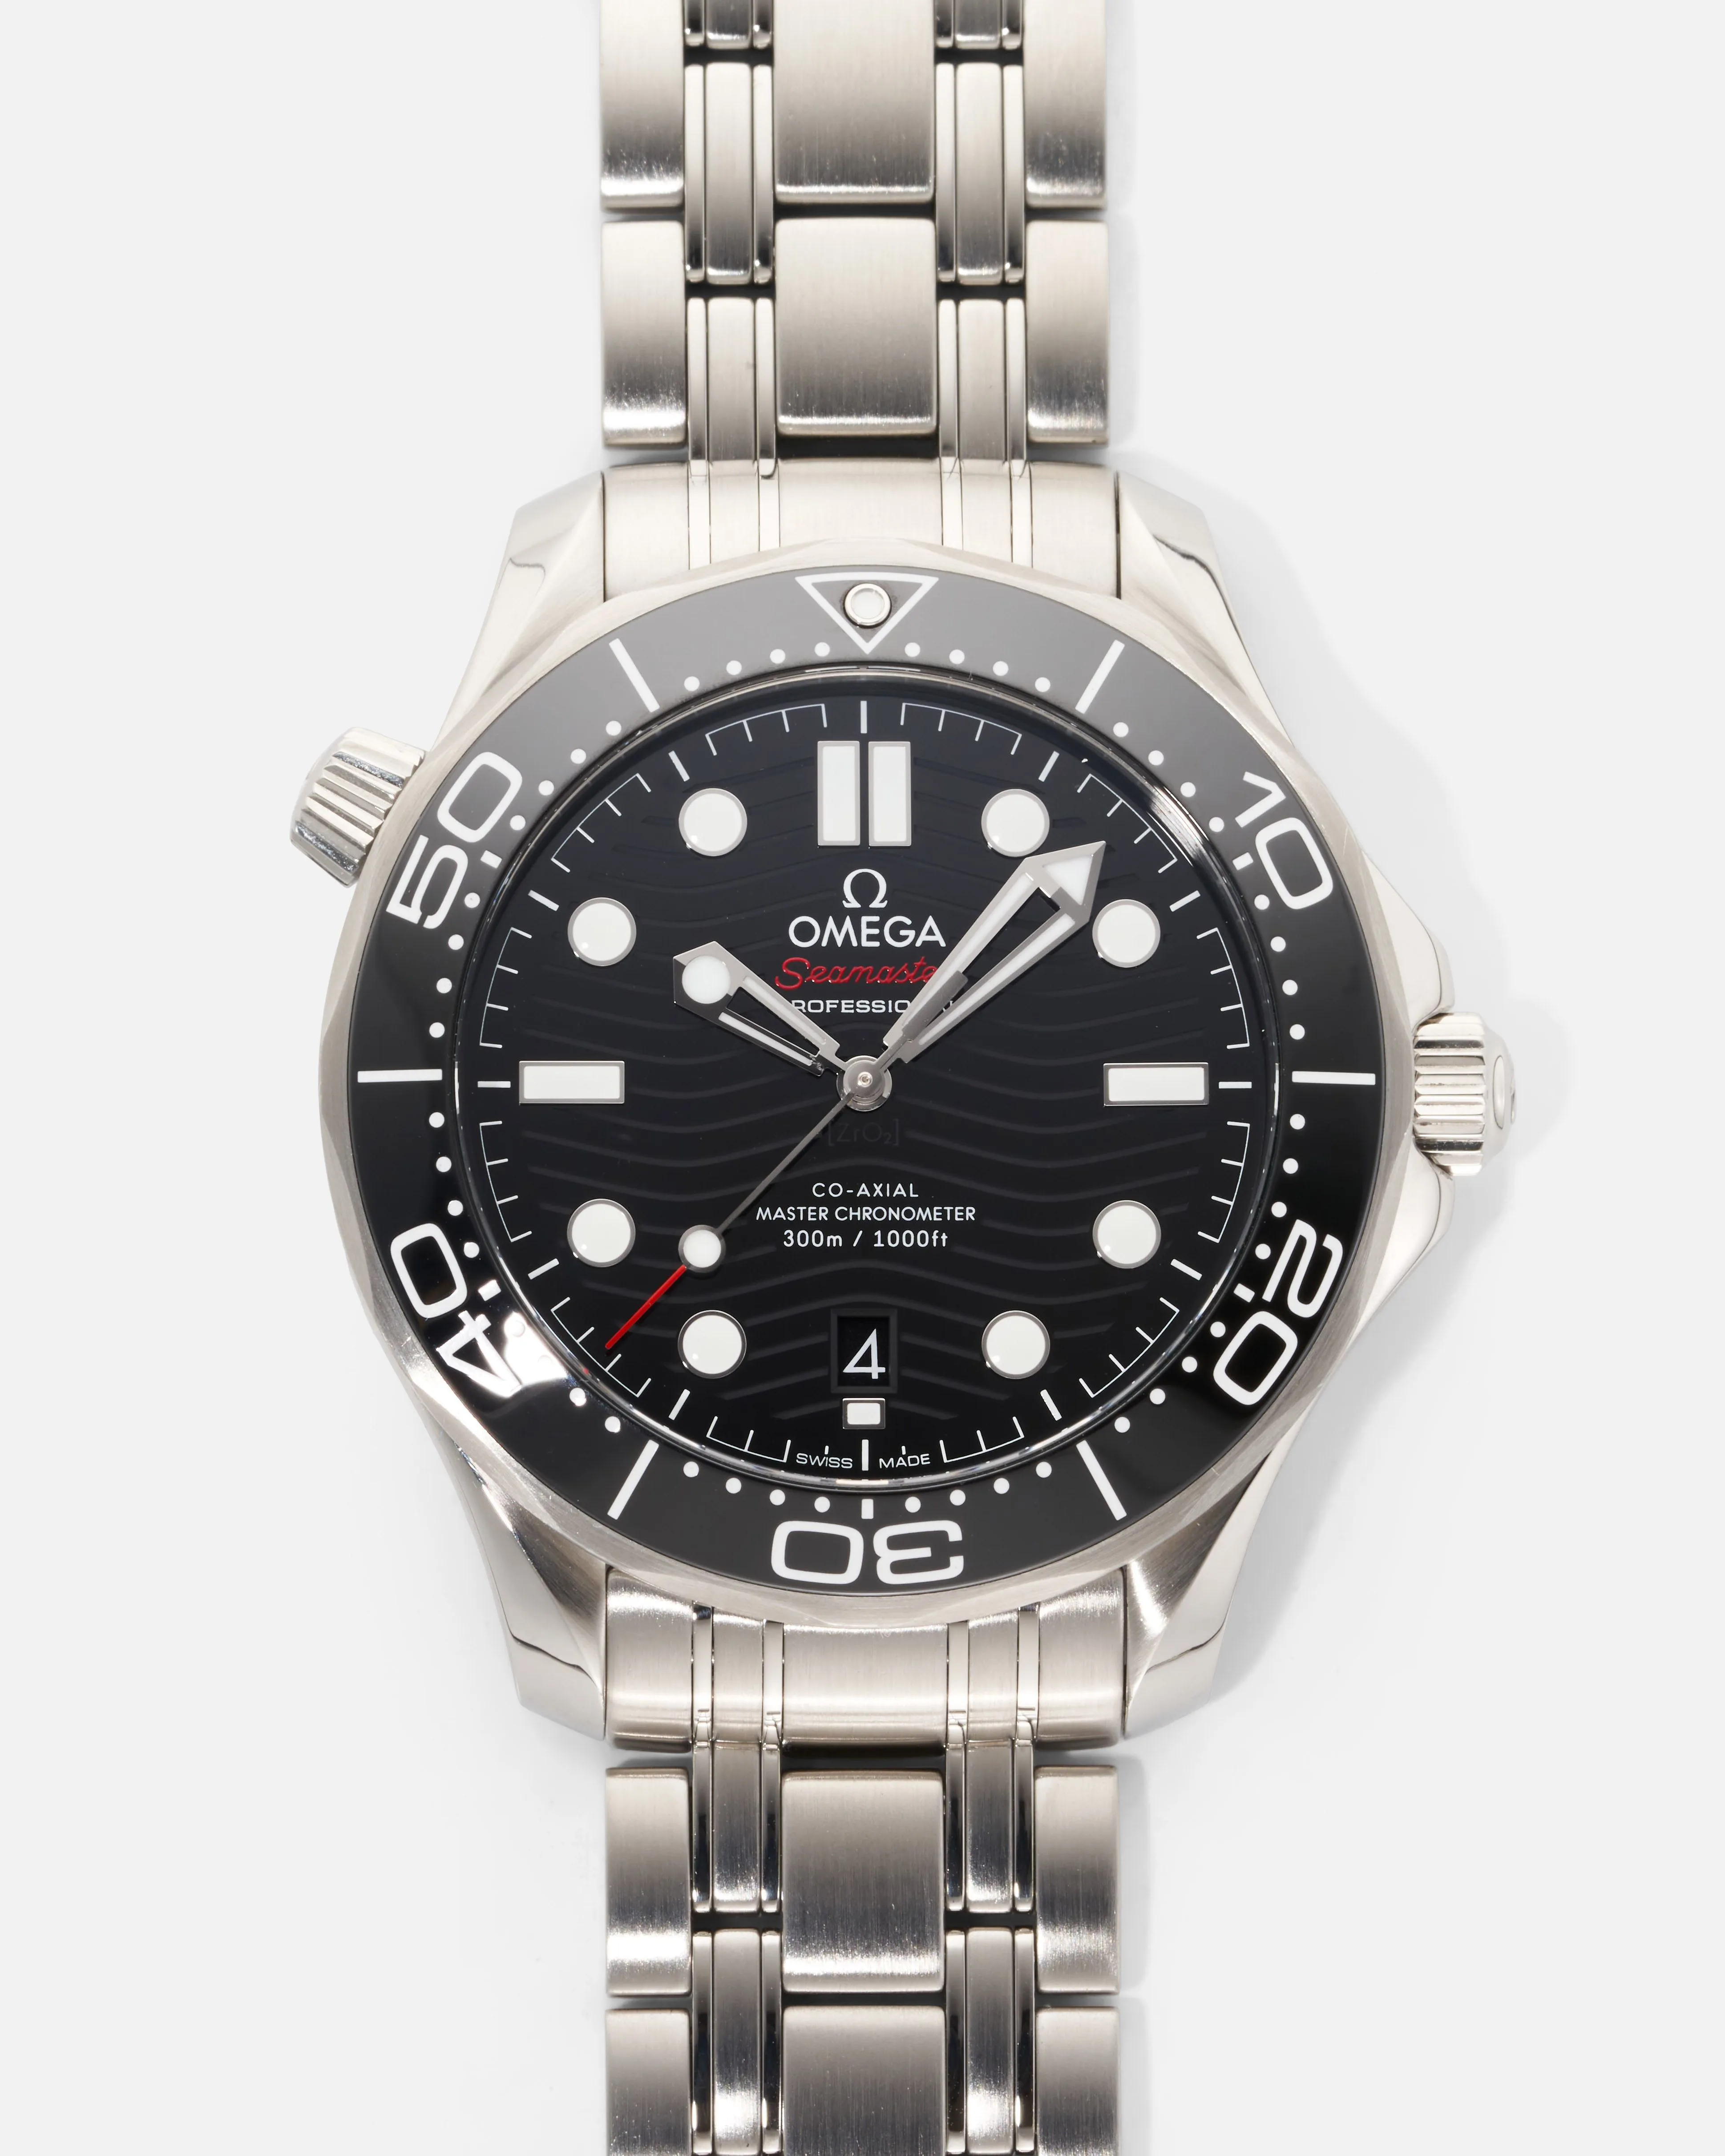 Omega Seamaster Diver 300M 210.30.42.20.01.001 42mm Stainless steel